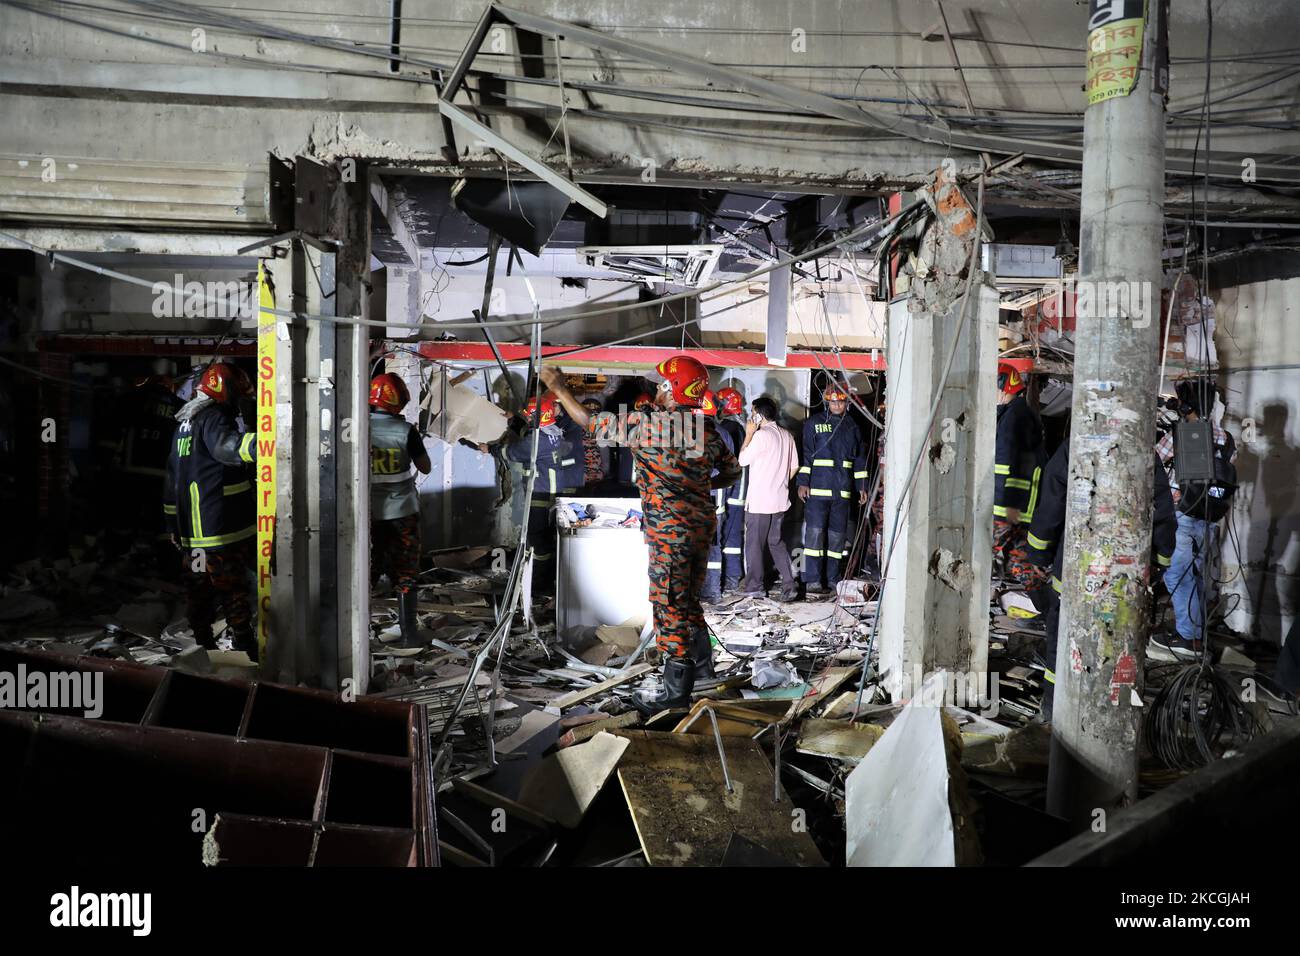 Fire rescue workers inspect the site after a massive blast occurred in a shop that killed several people in Dhaka, Bangladesh on June 27, 2021. (Photo by Syed Mahamudur Rahman/NurPhoto) Stock Photo